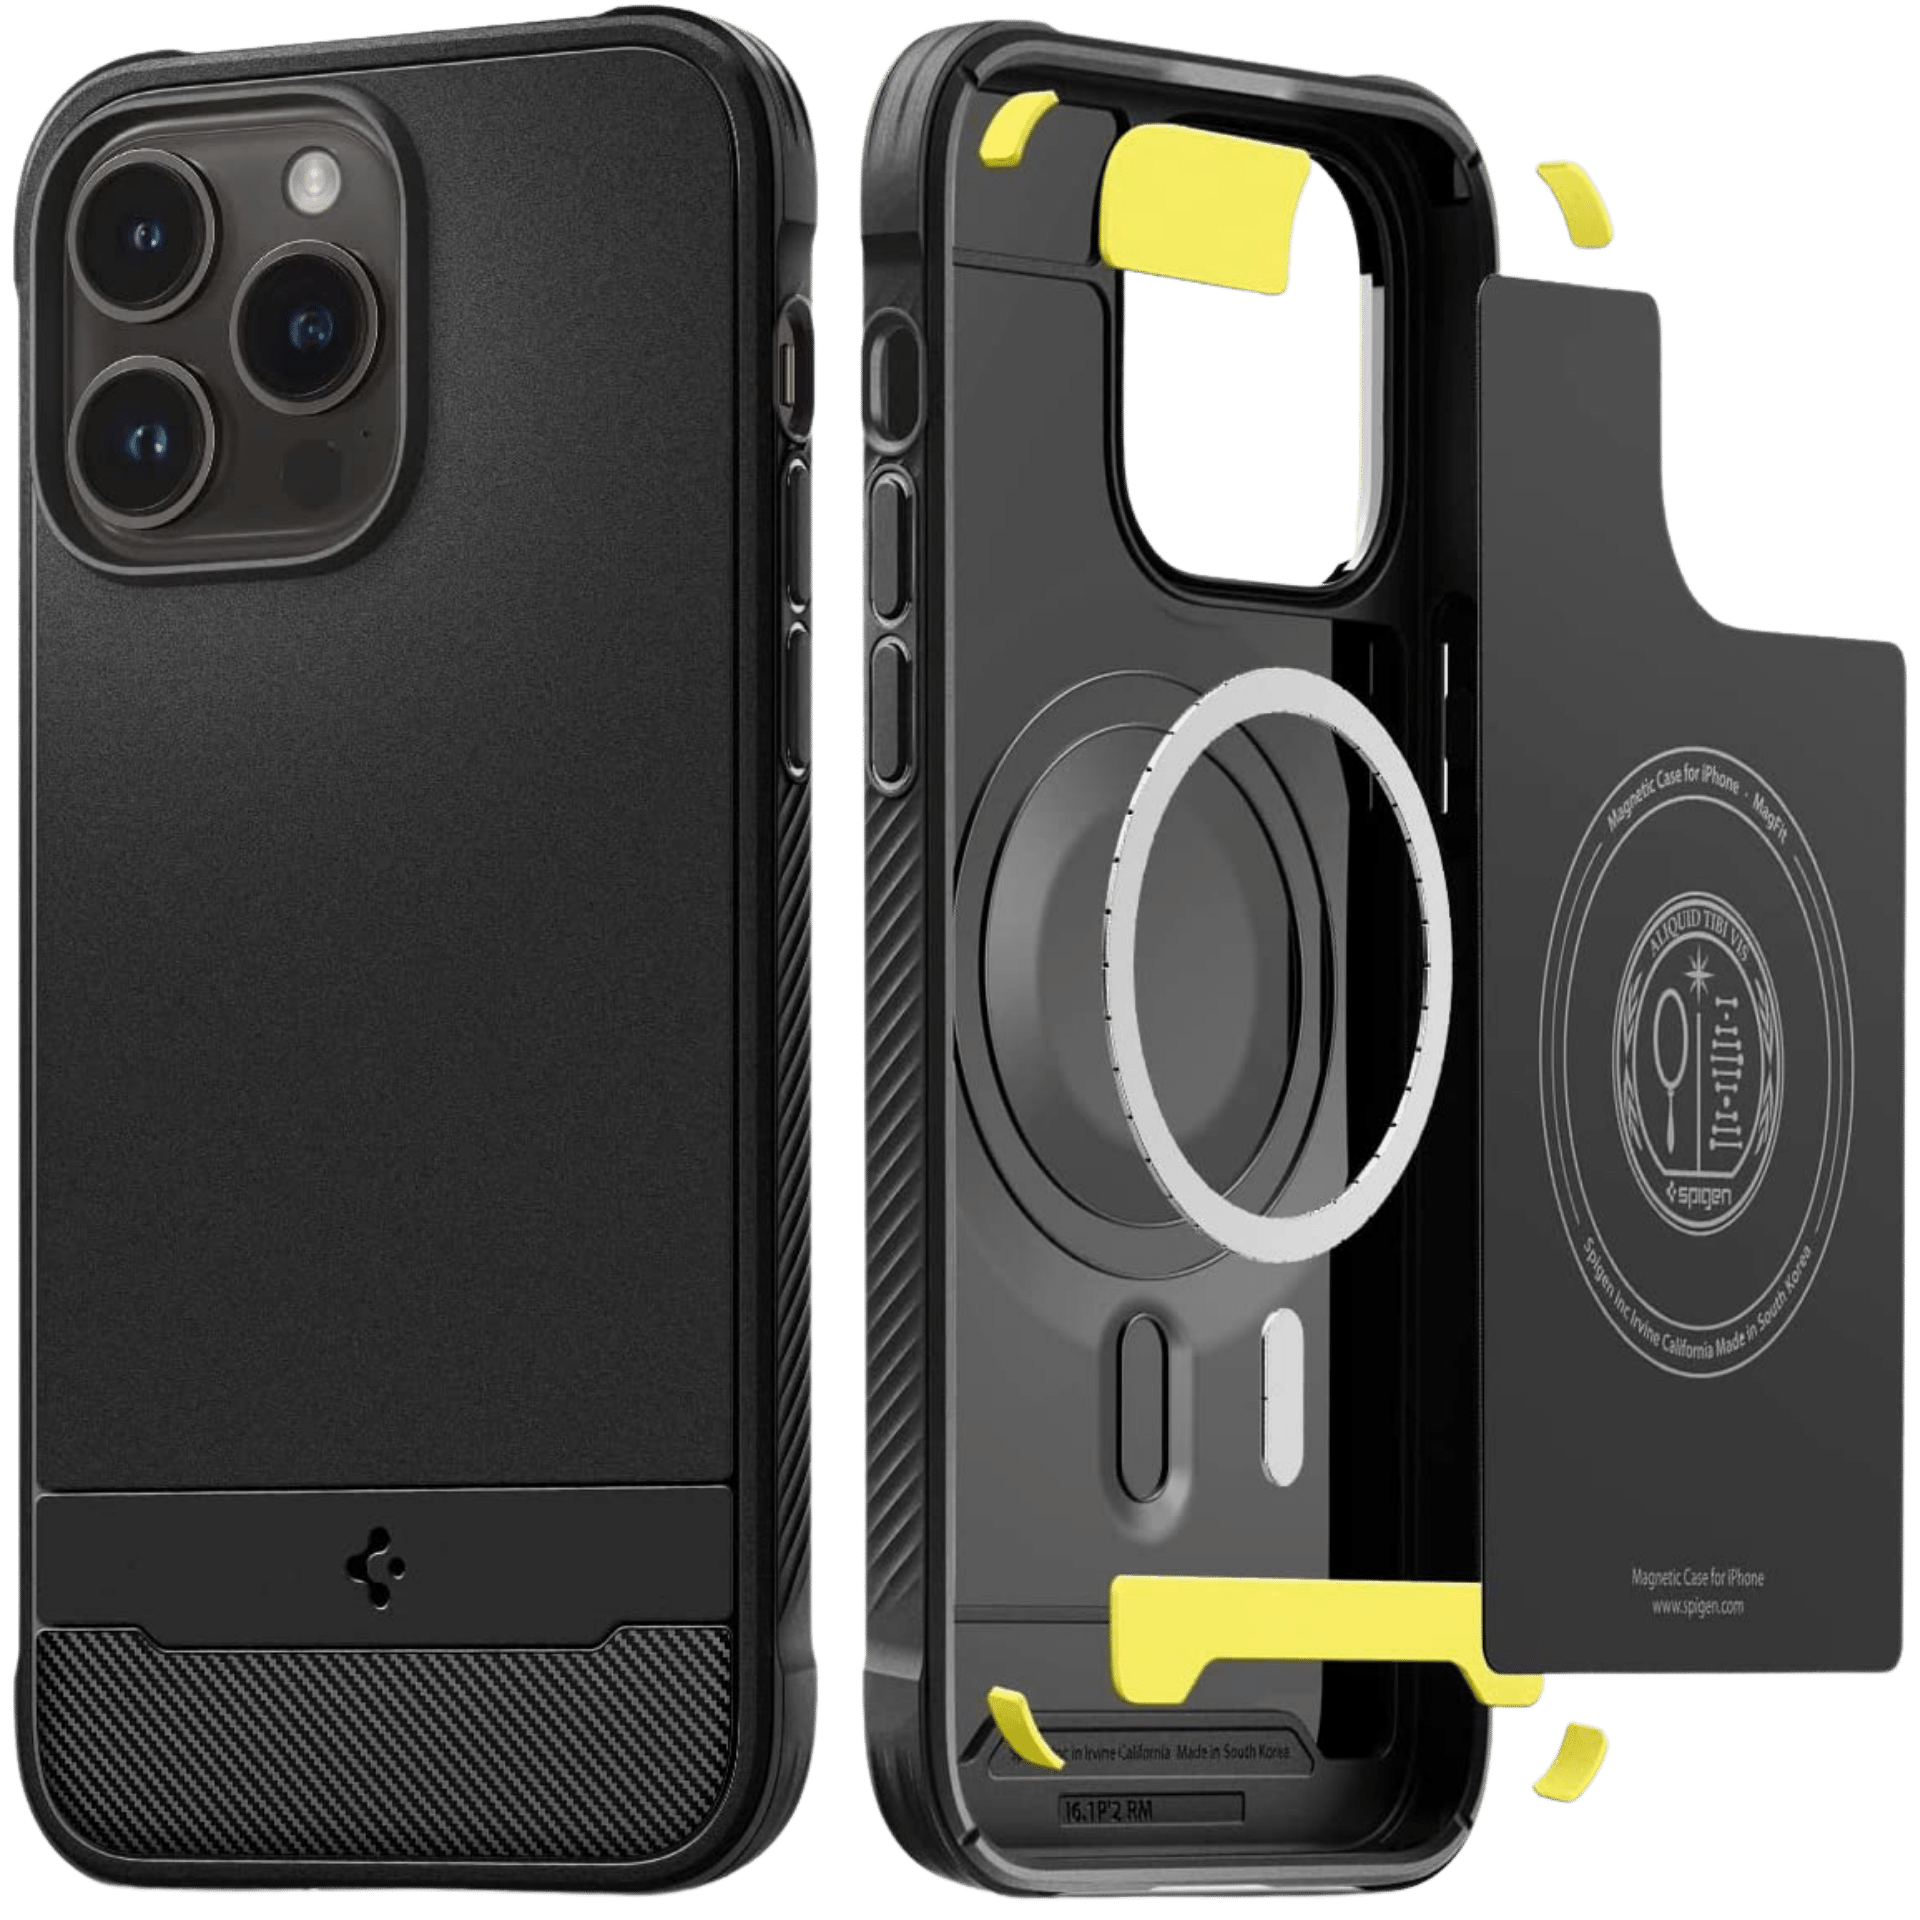 Best Heavy Duty iPhone Cases For Your Apple Device — Rokform